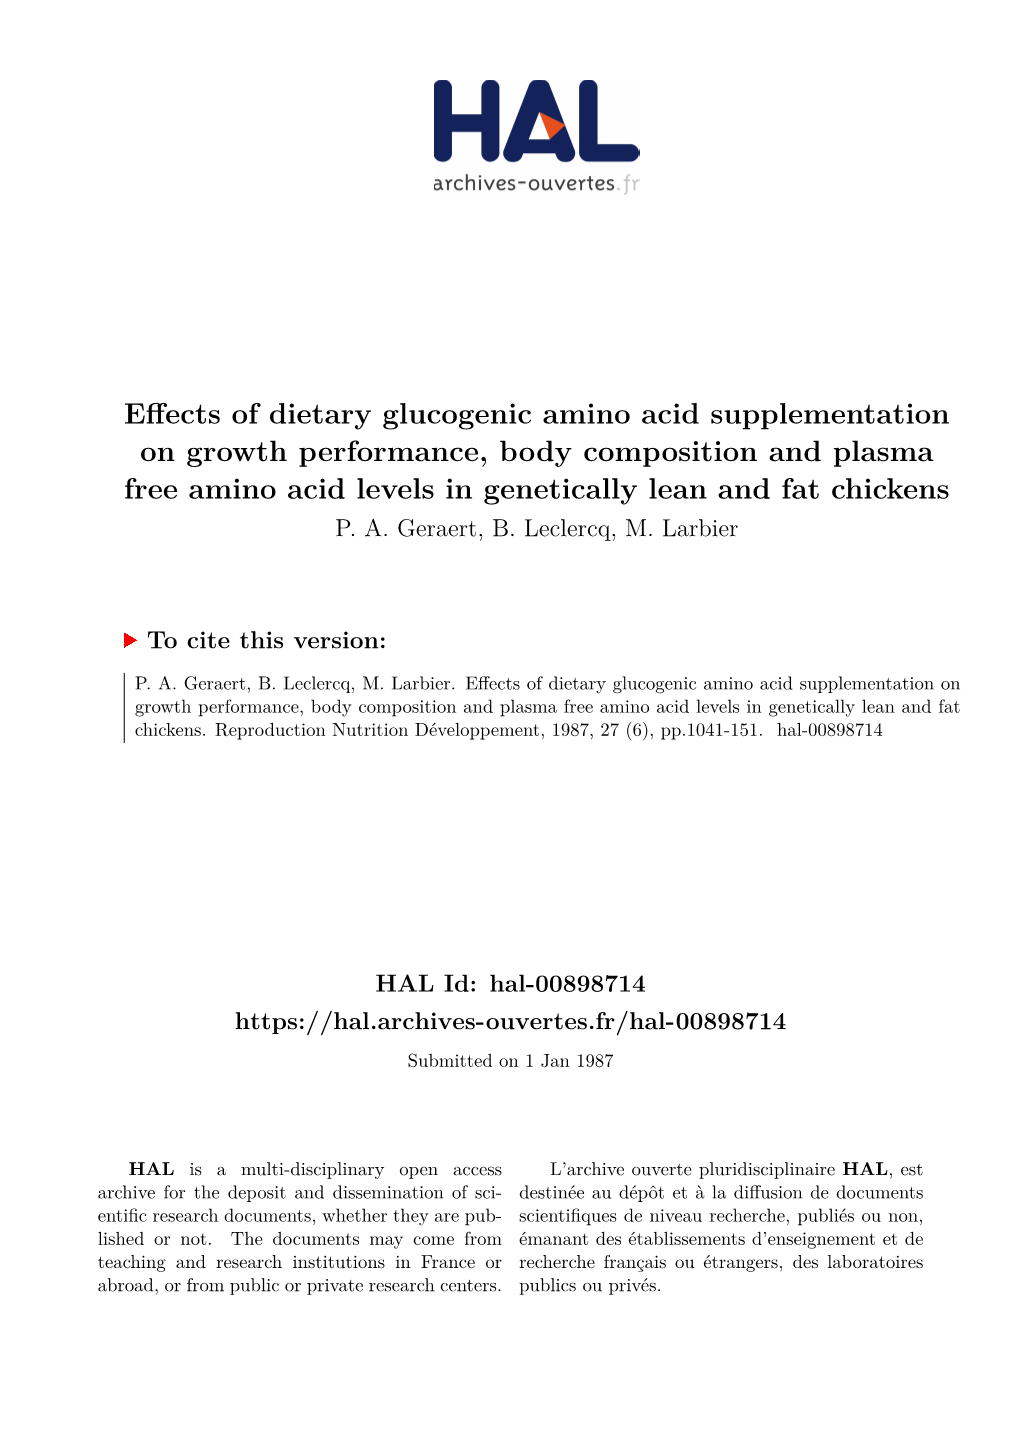 Effects of Dietary Glucogenic Amino Acid Supplementation on Growth Performance, Body Composition and Plasma Free Amino Acid Leve